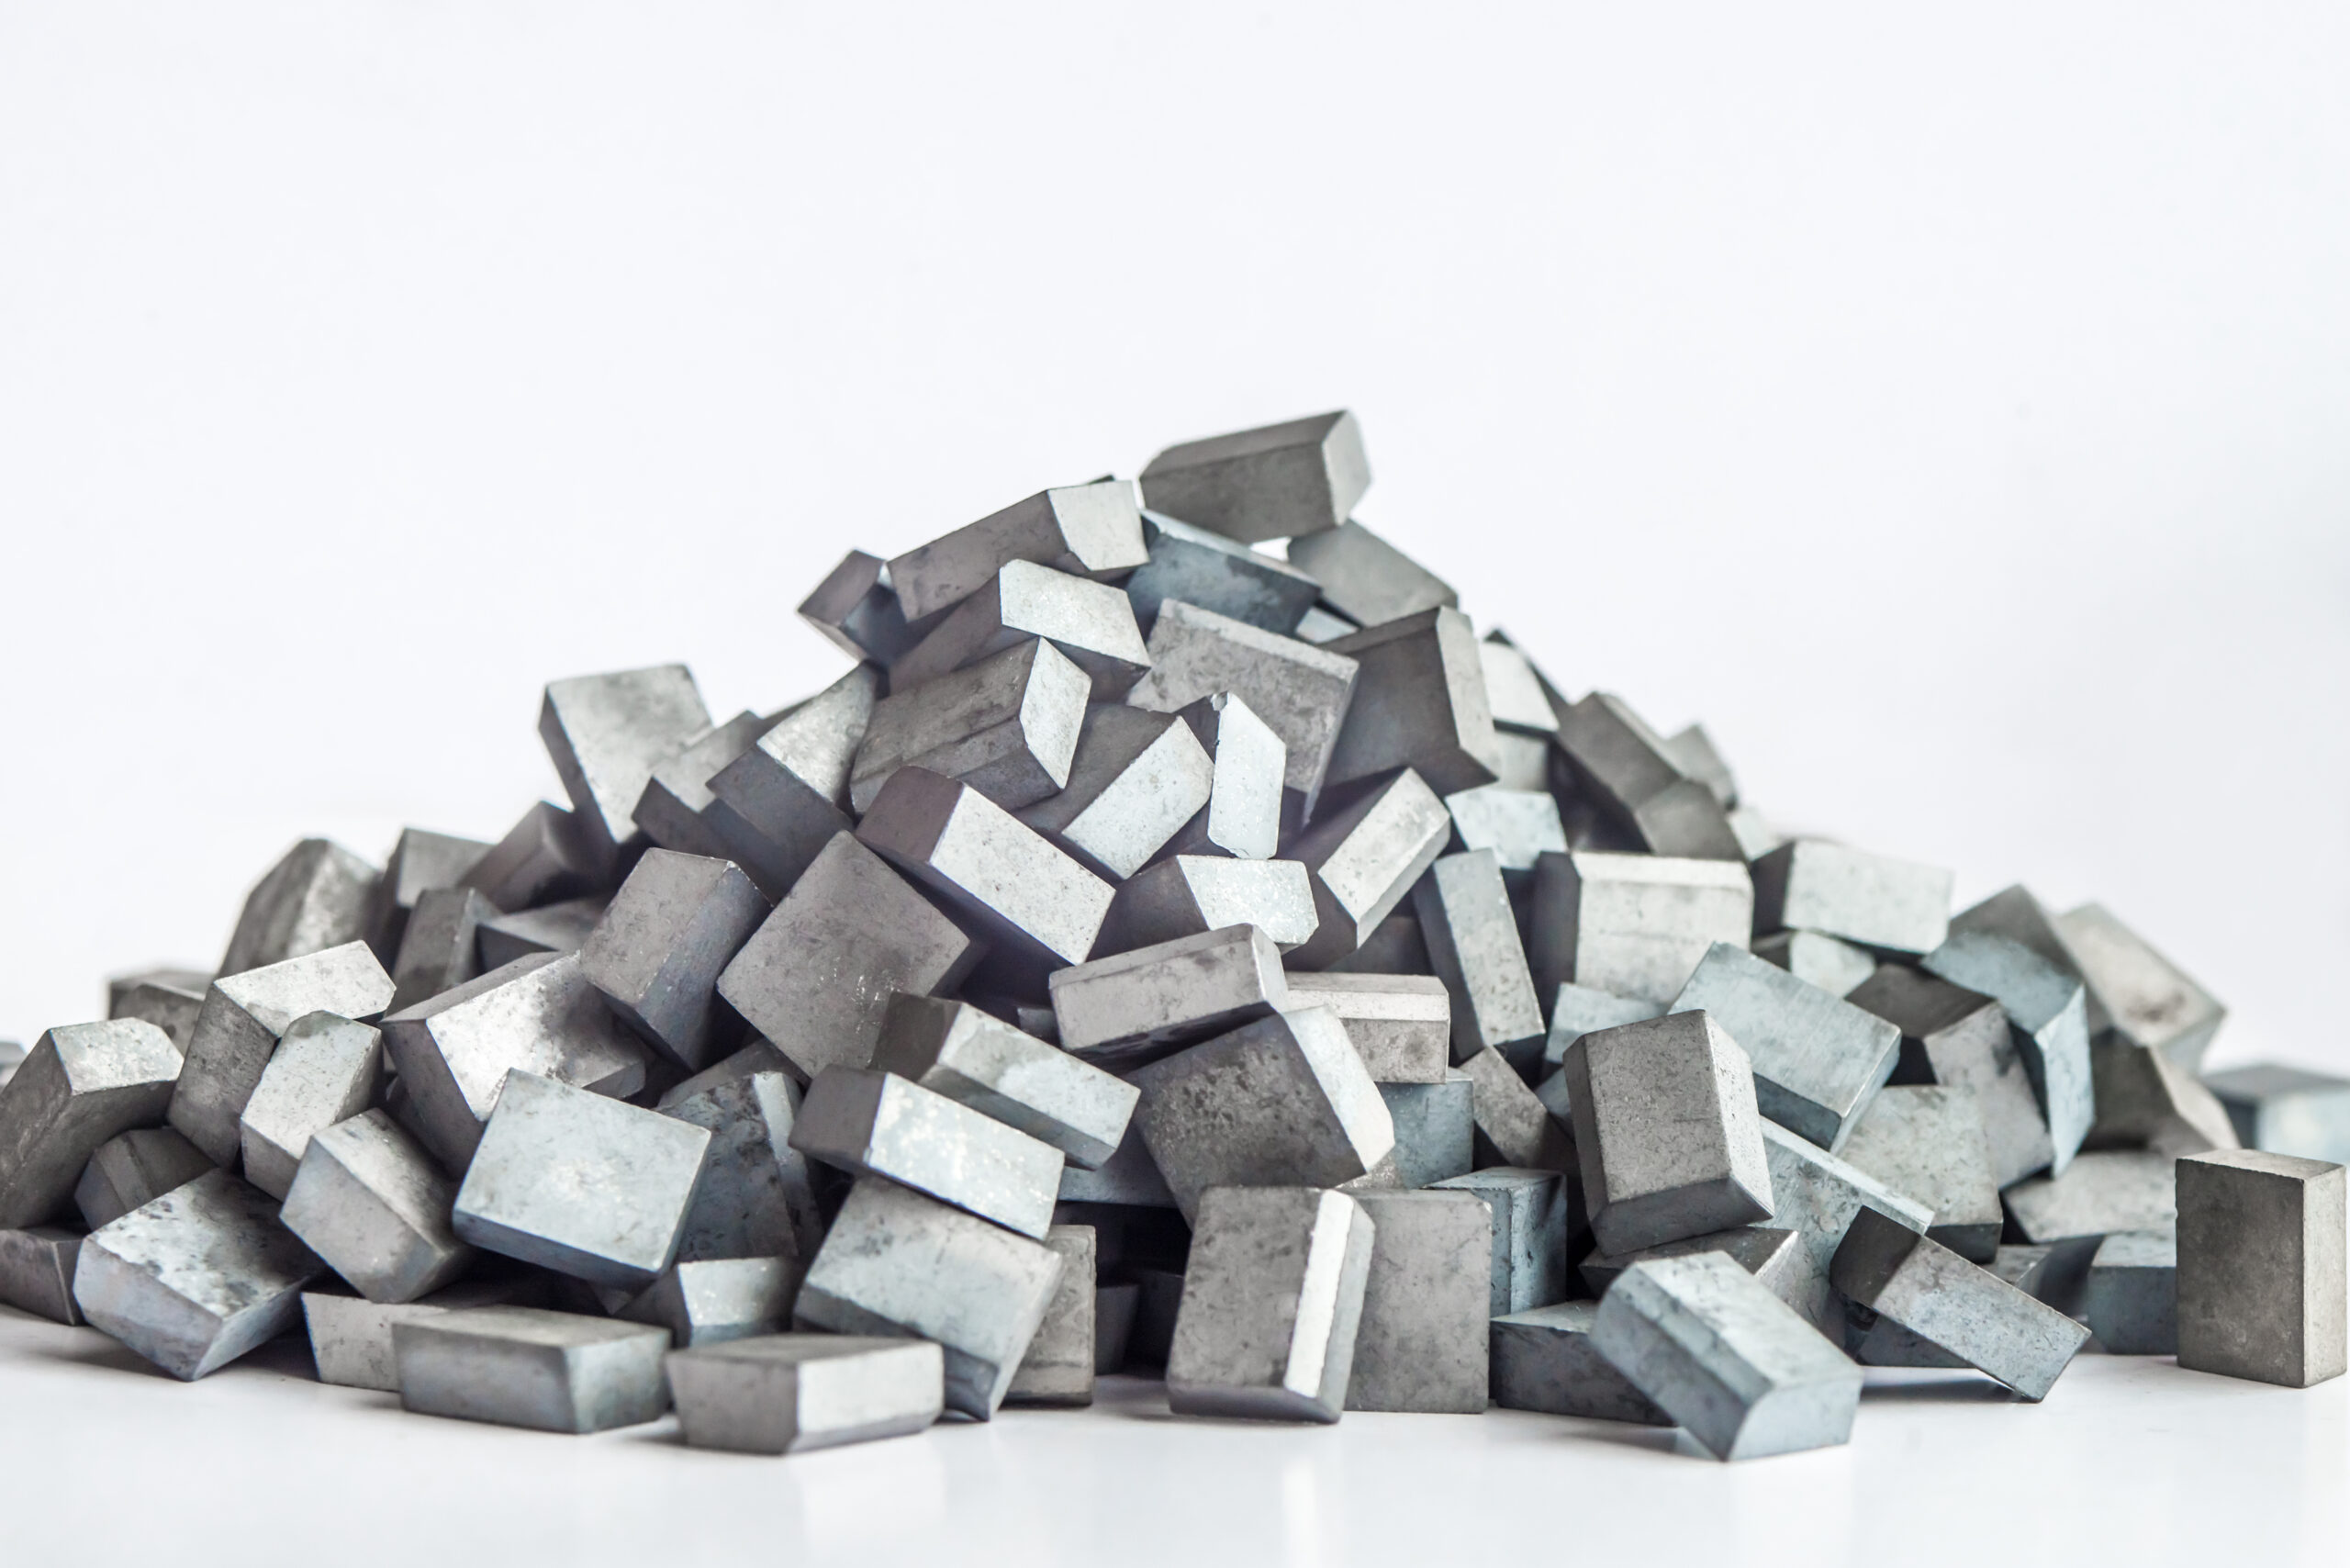 Why Are Tungsten Carbide Prices Higher Than Steel? - Complete Carbide